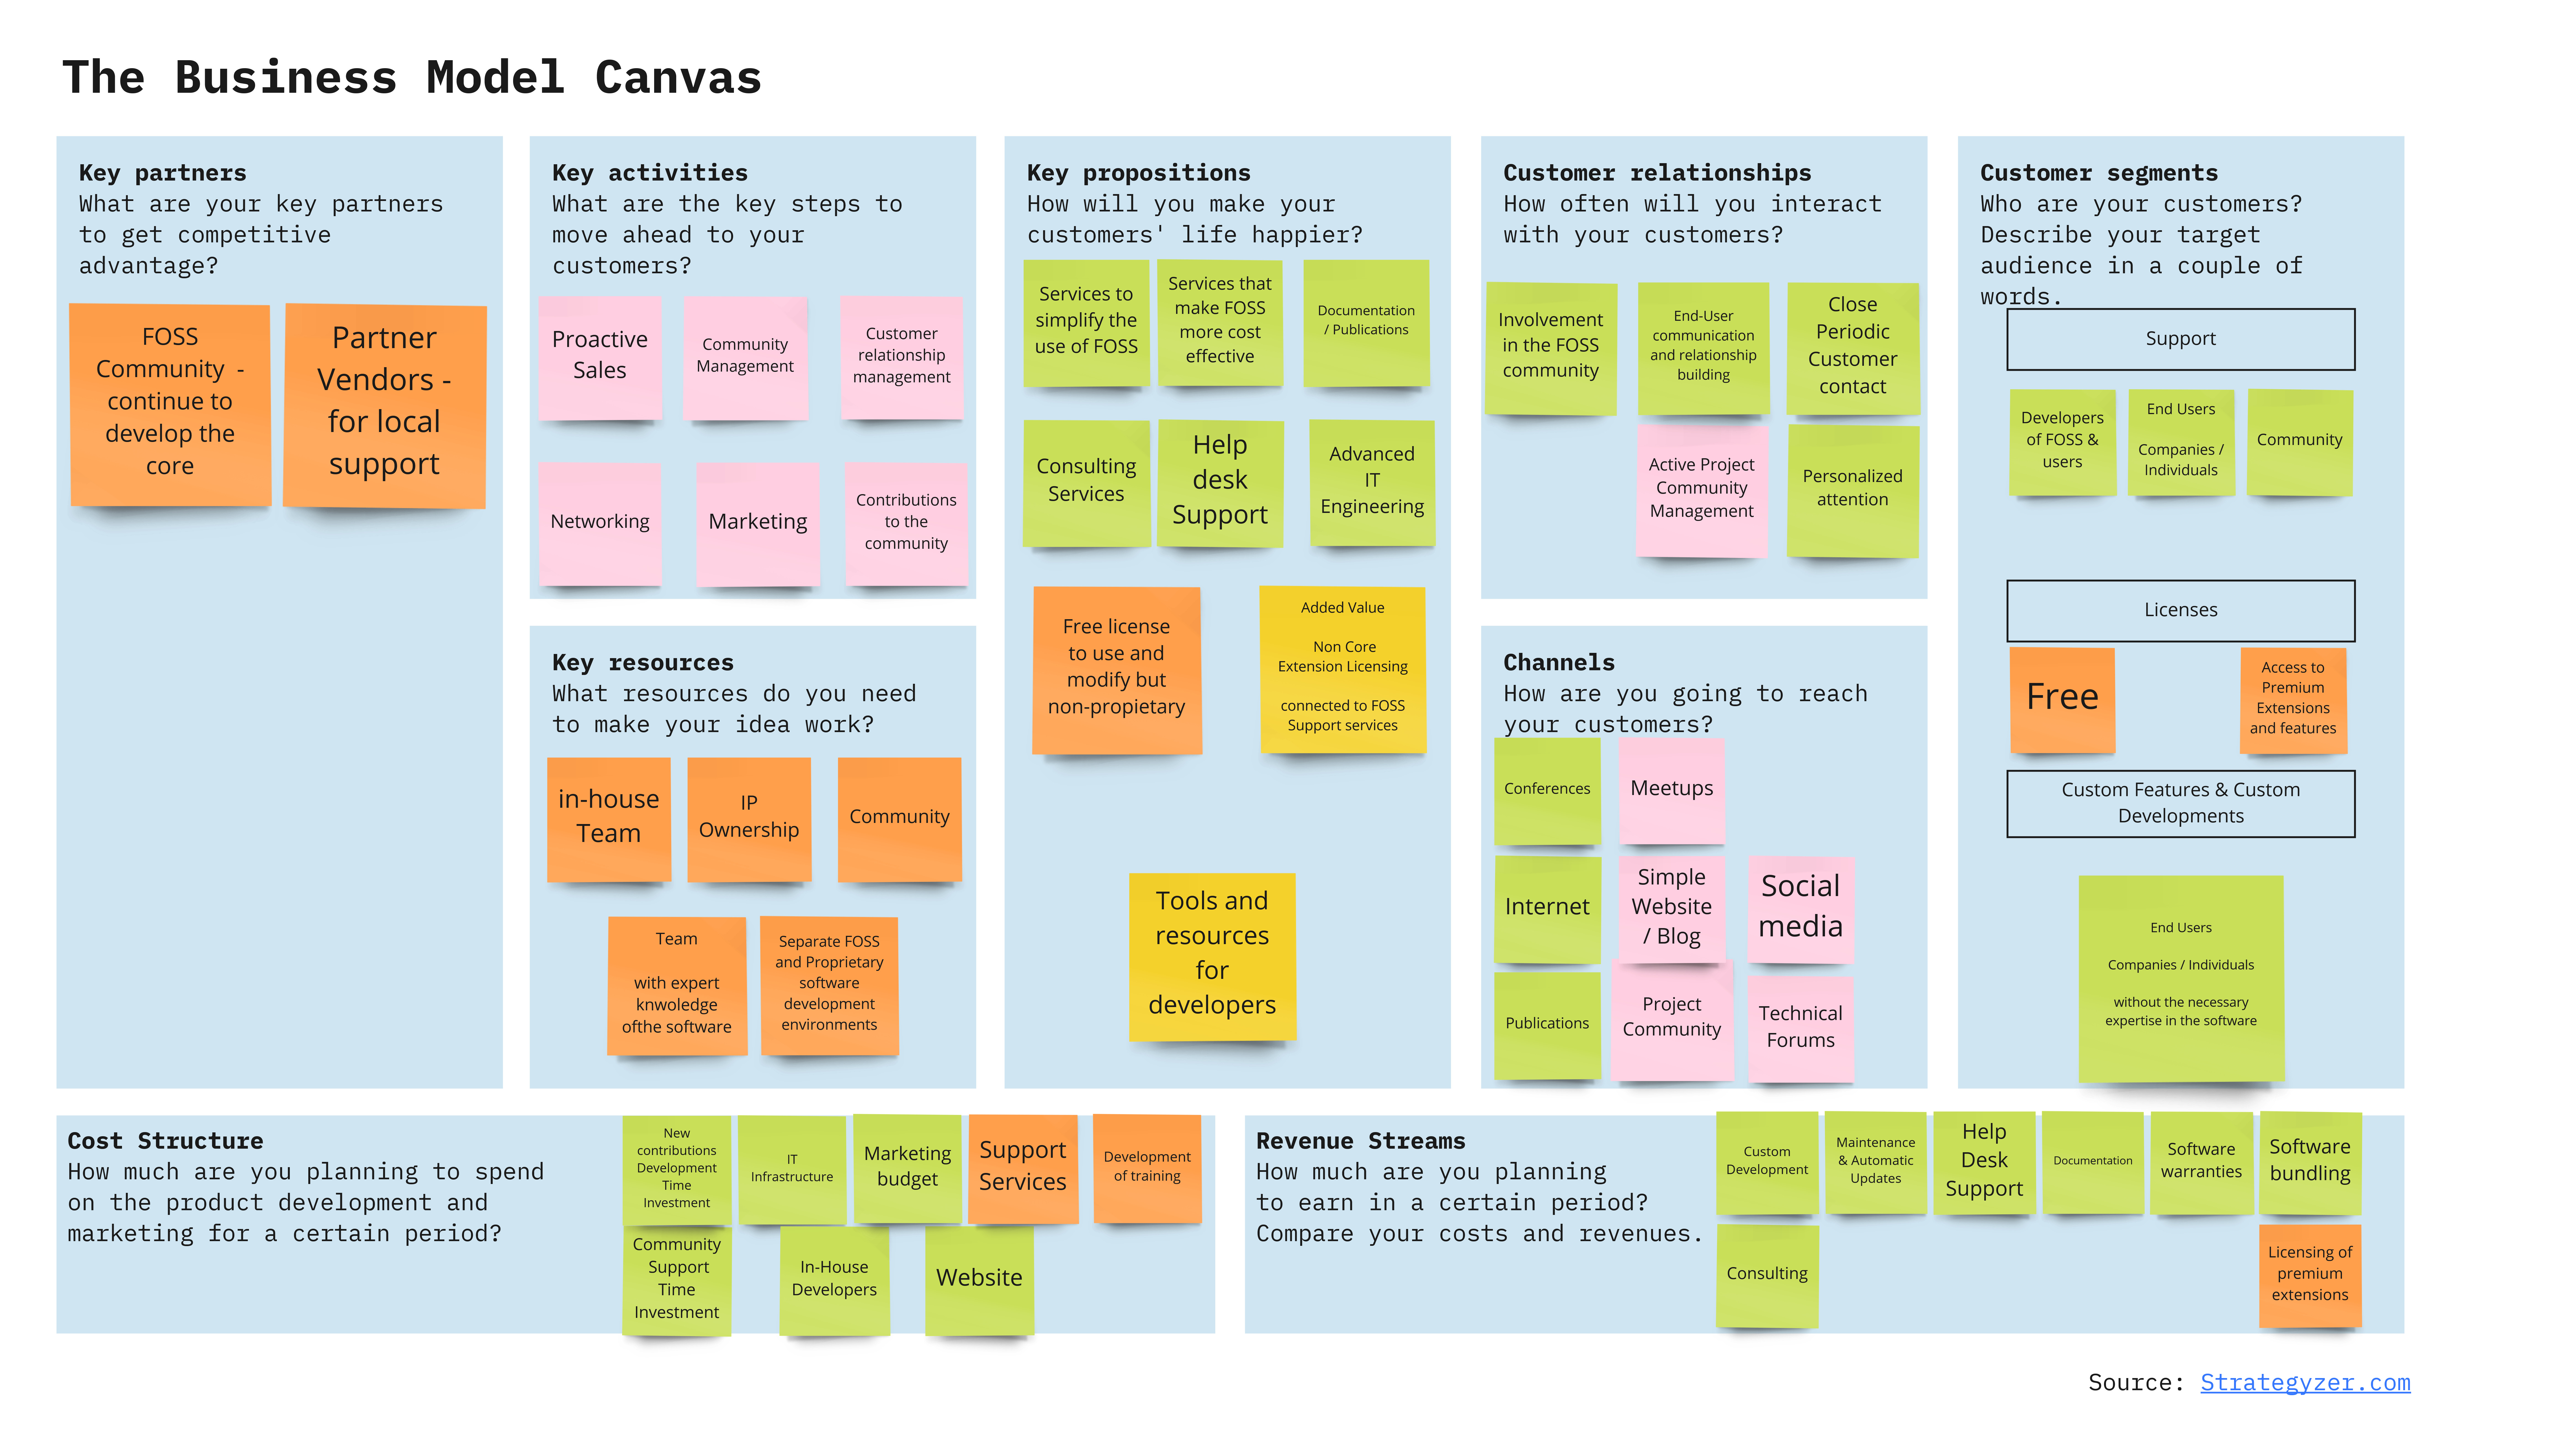 BUSINESS MODEL CANVAS: Proprietary extensions or “Open Core Licensing”